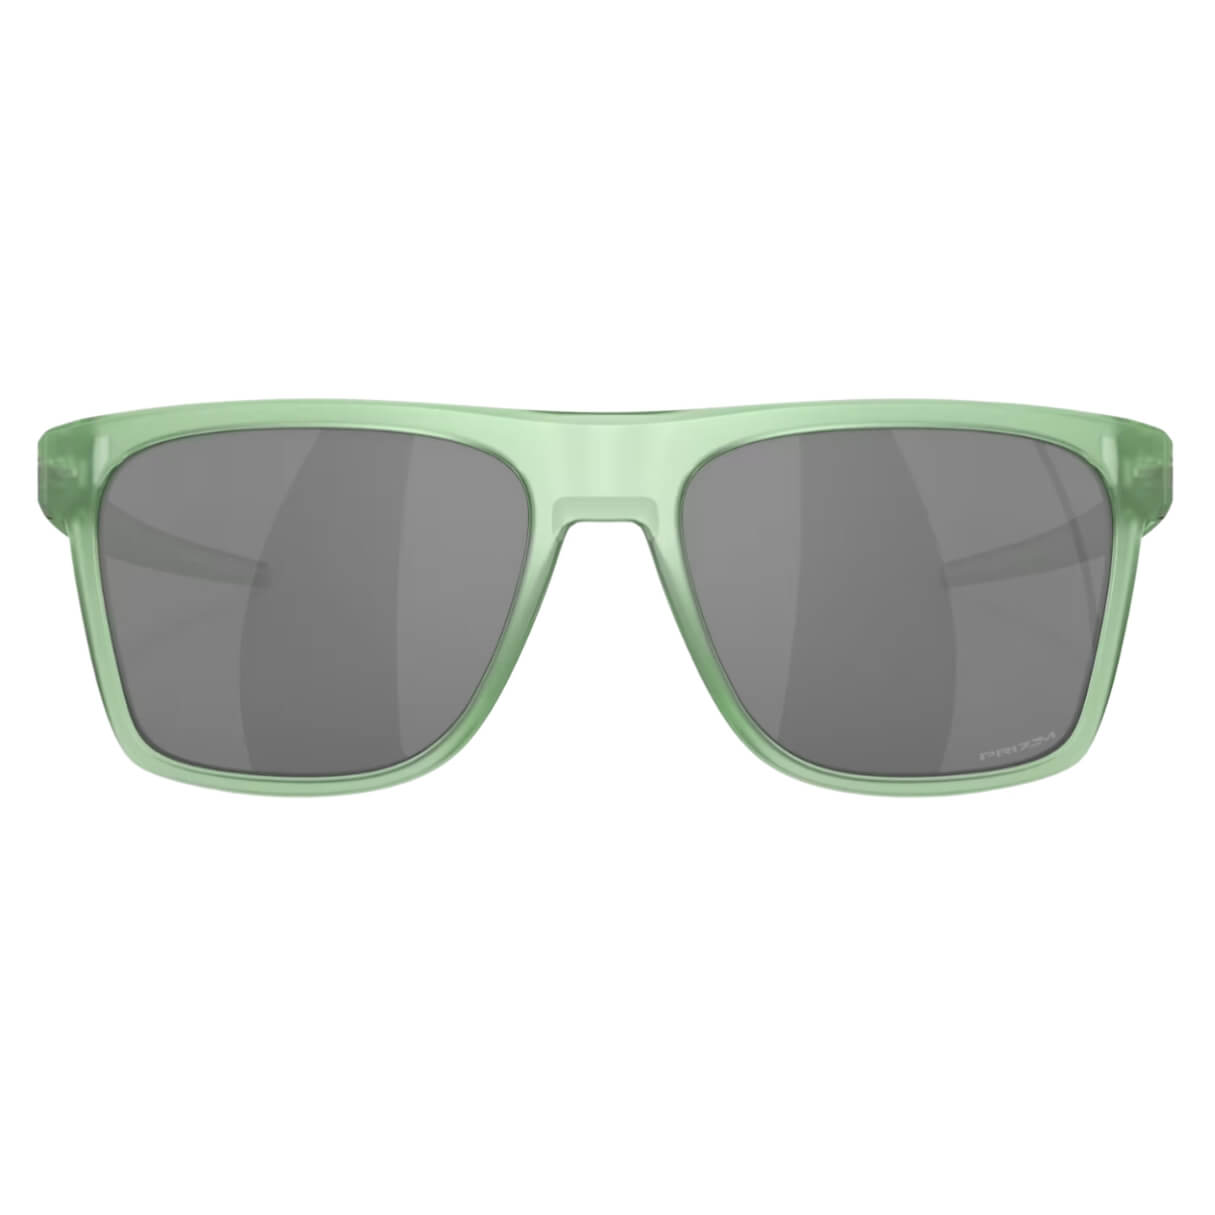 Oakley OO9100 Leffingwell 910017 Sunglasses - Matte Jade with Prizm Lens Full Front View